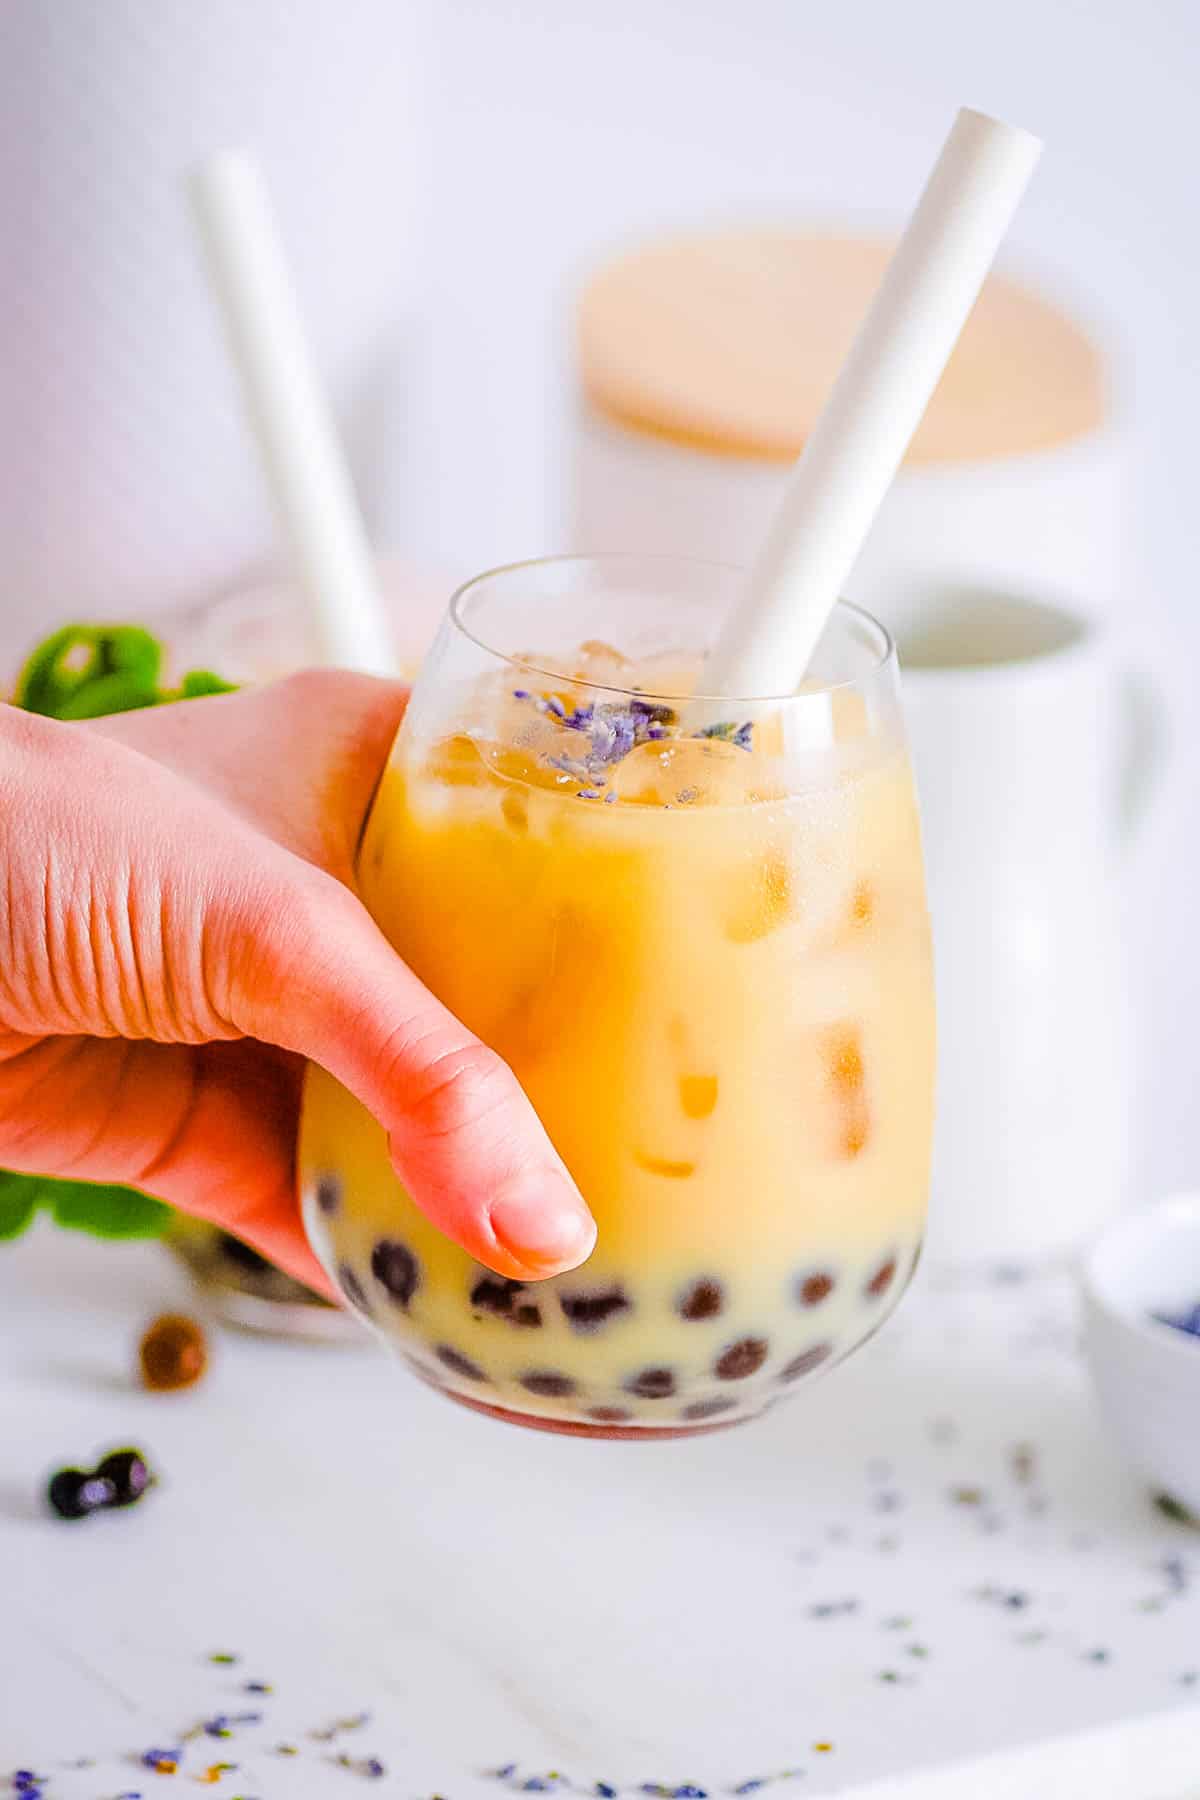 Lavender milk tea with boba in a glass with a straw.